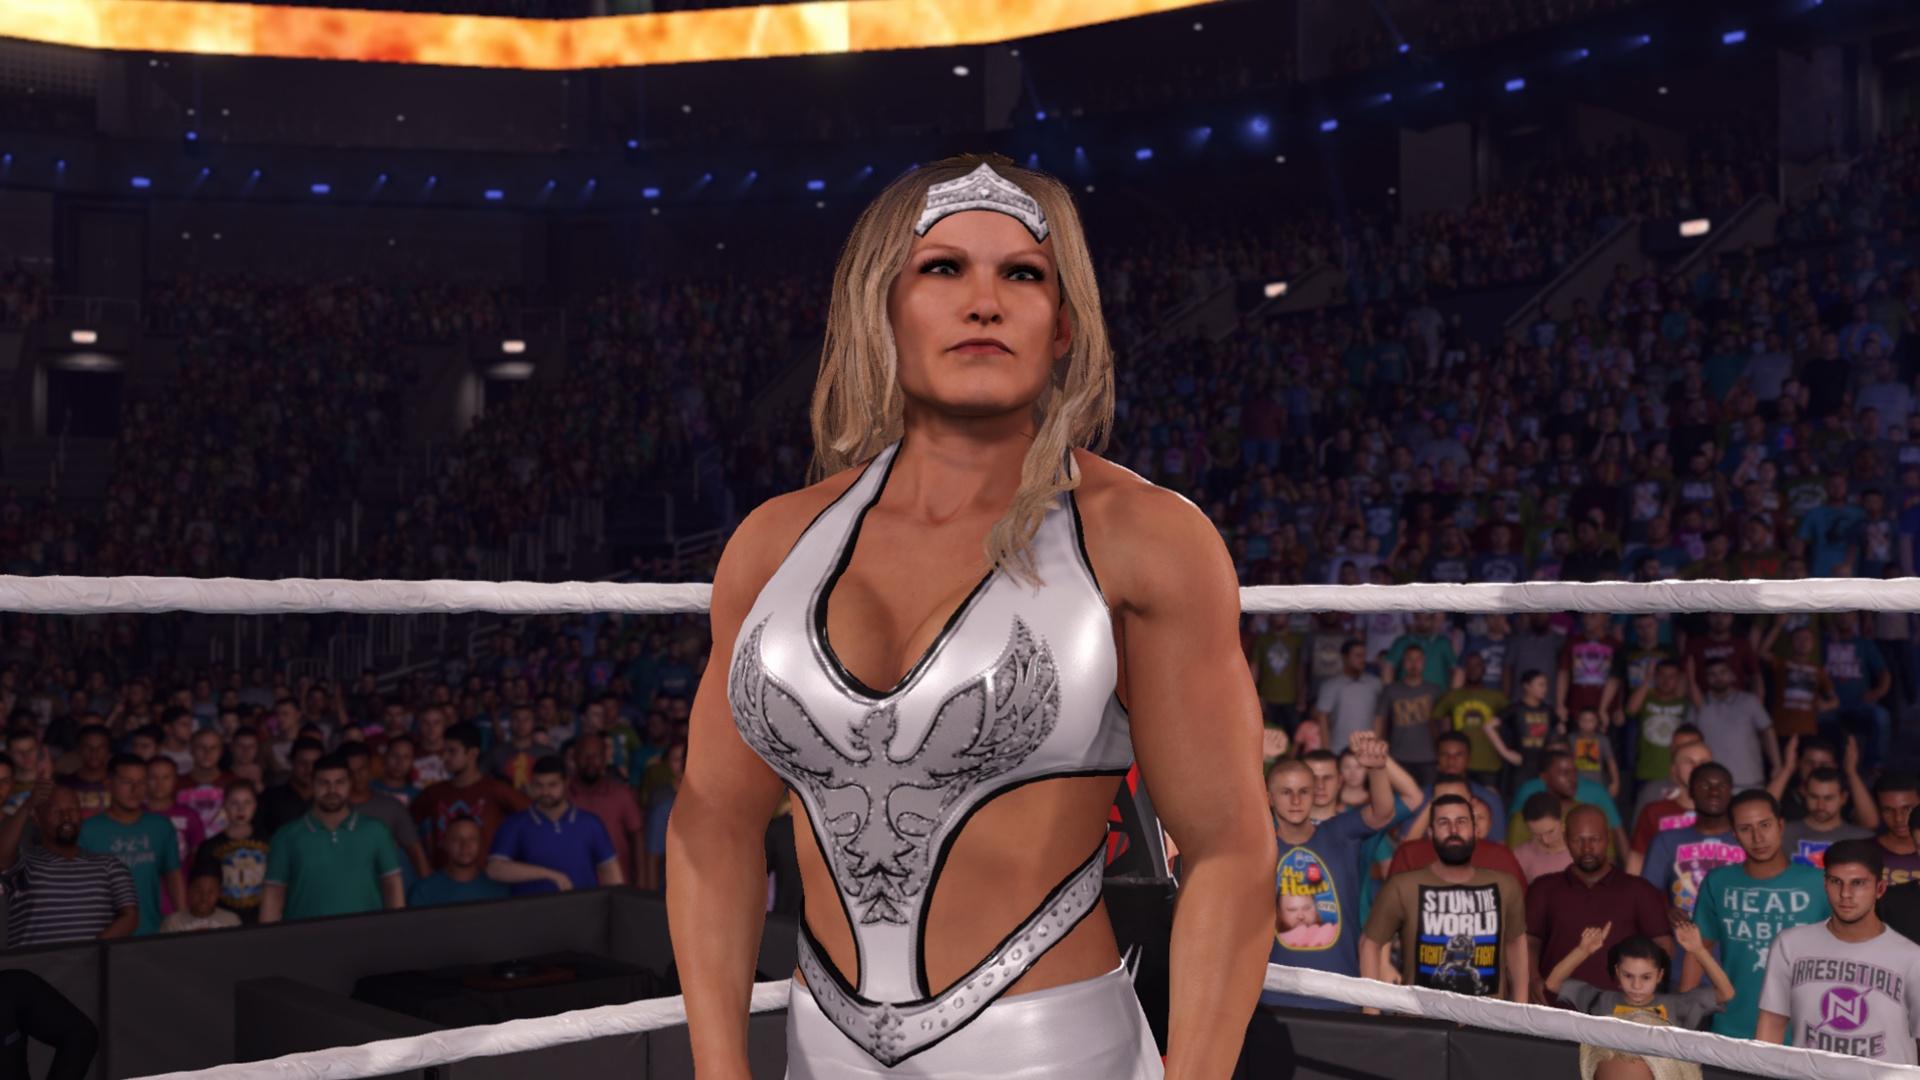 WWE 2K22 review – A phoenix rises from the ashes